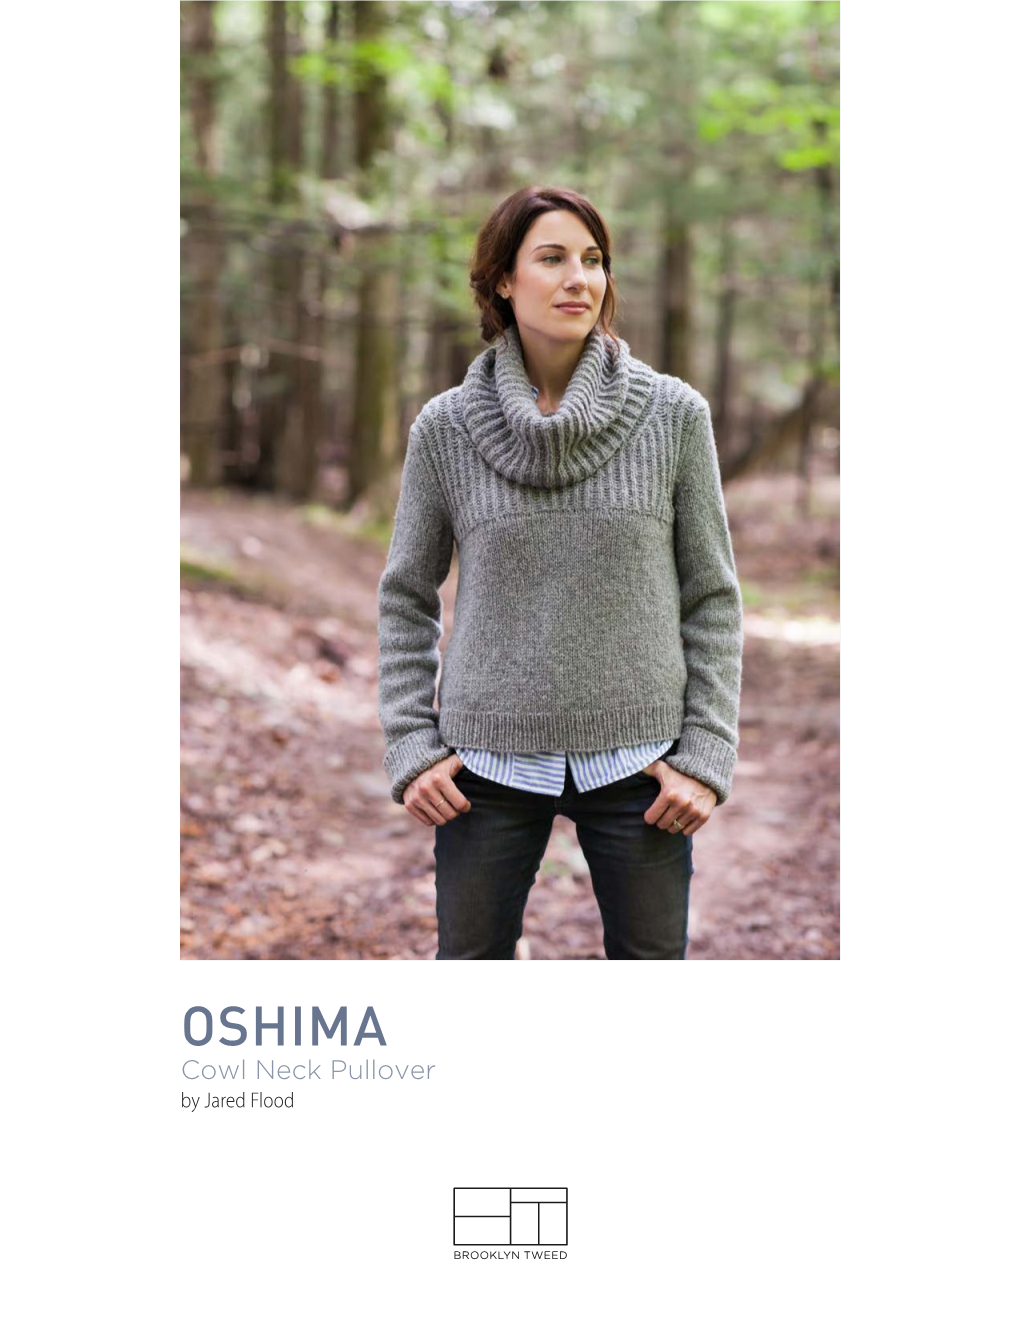 OSHIMA Cowl Neck Pullover by Jared Flood